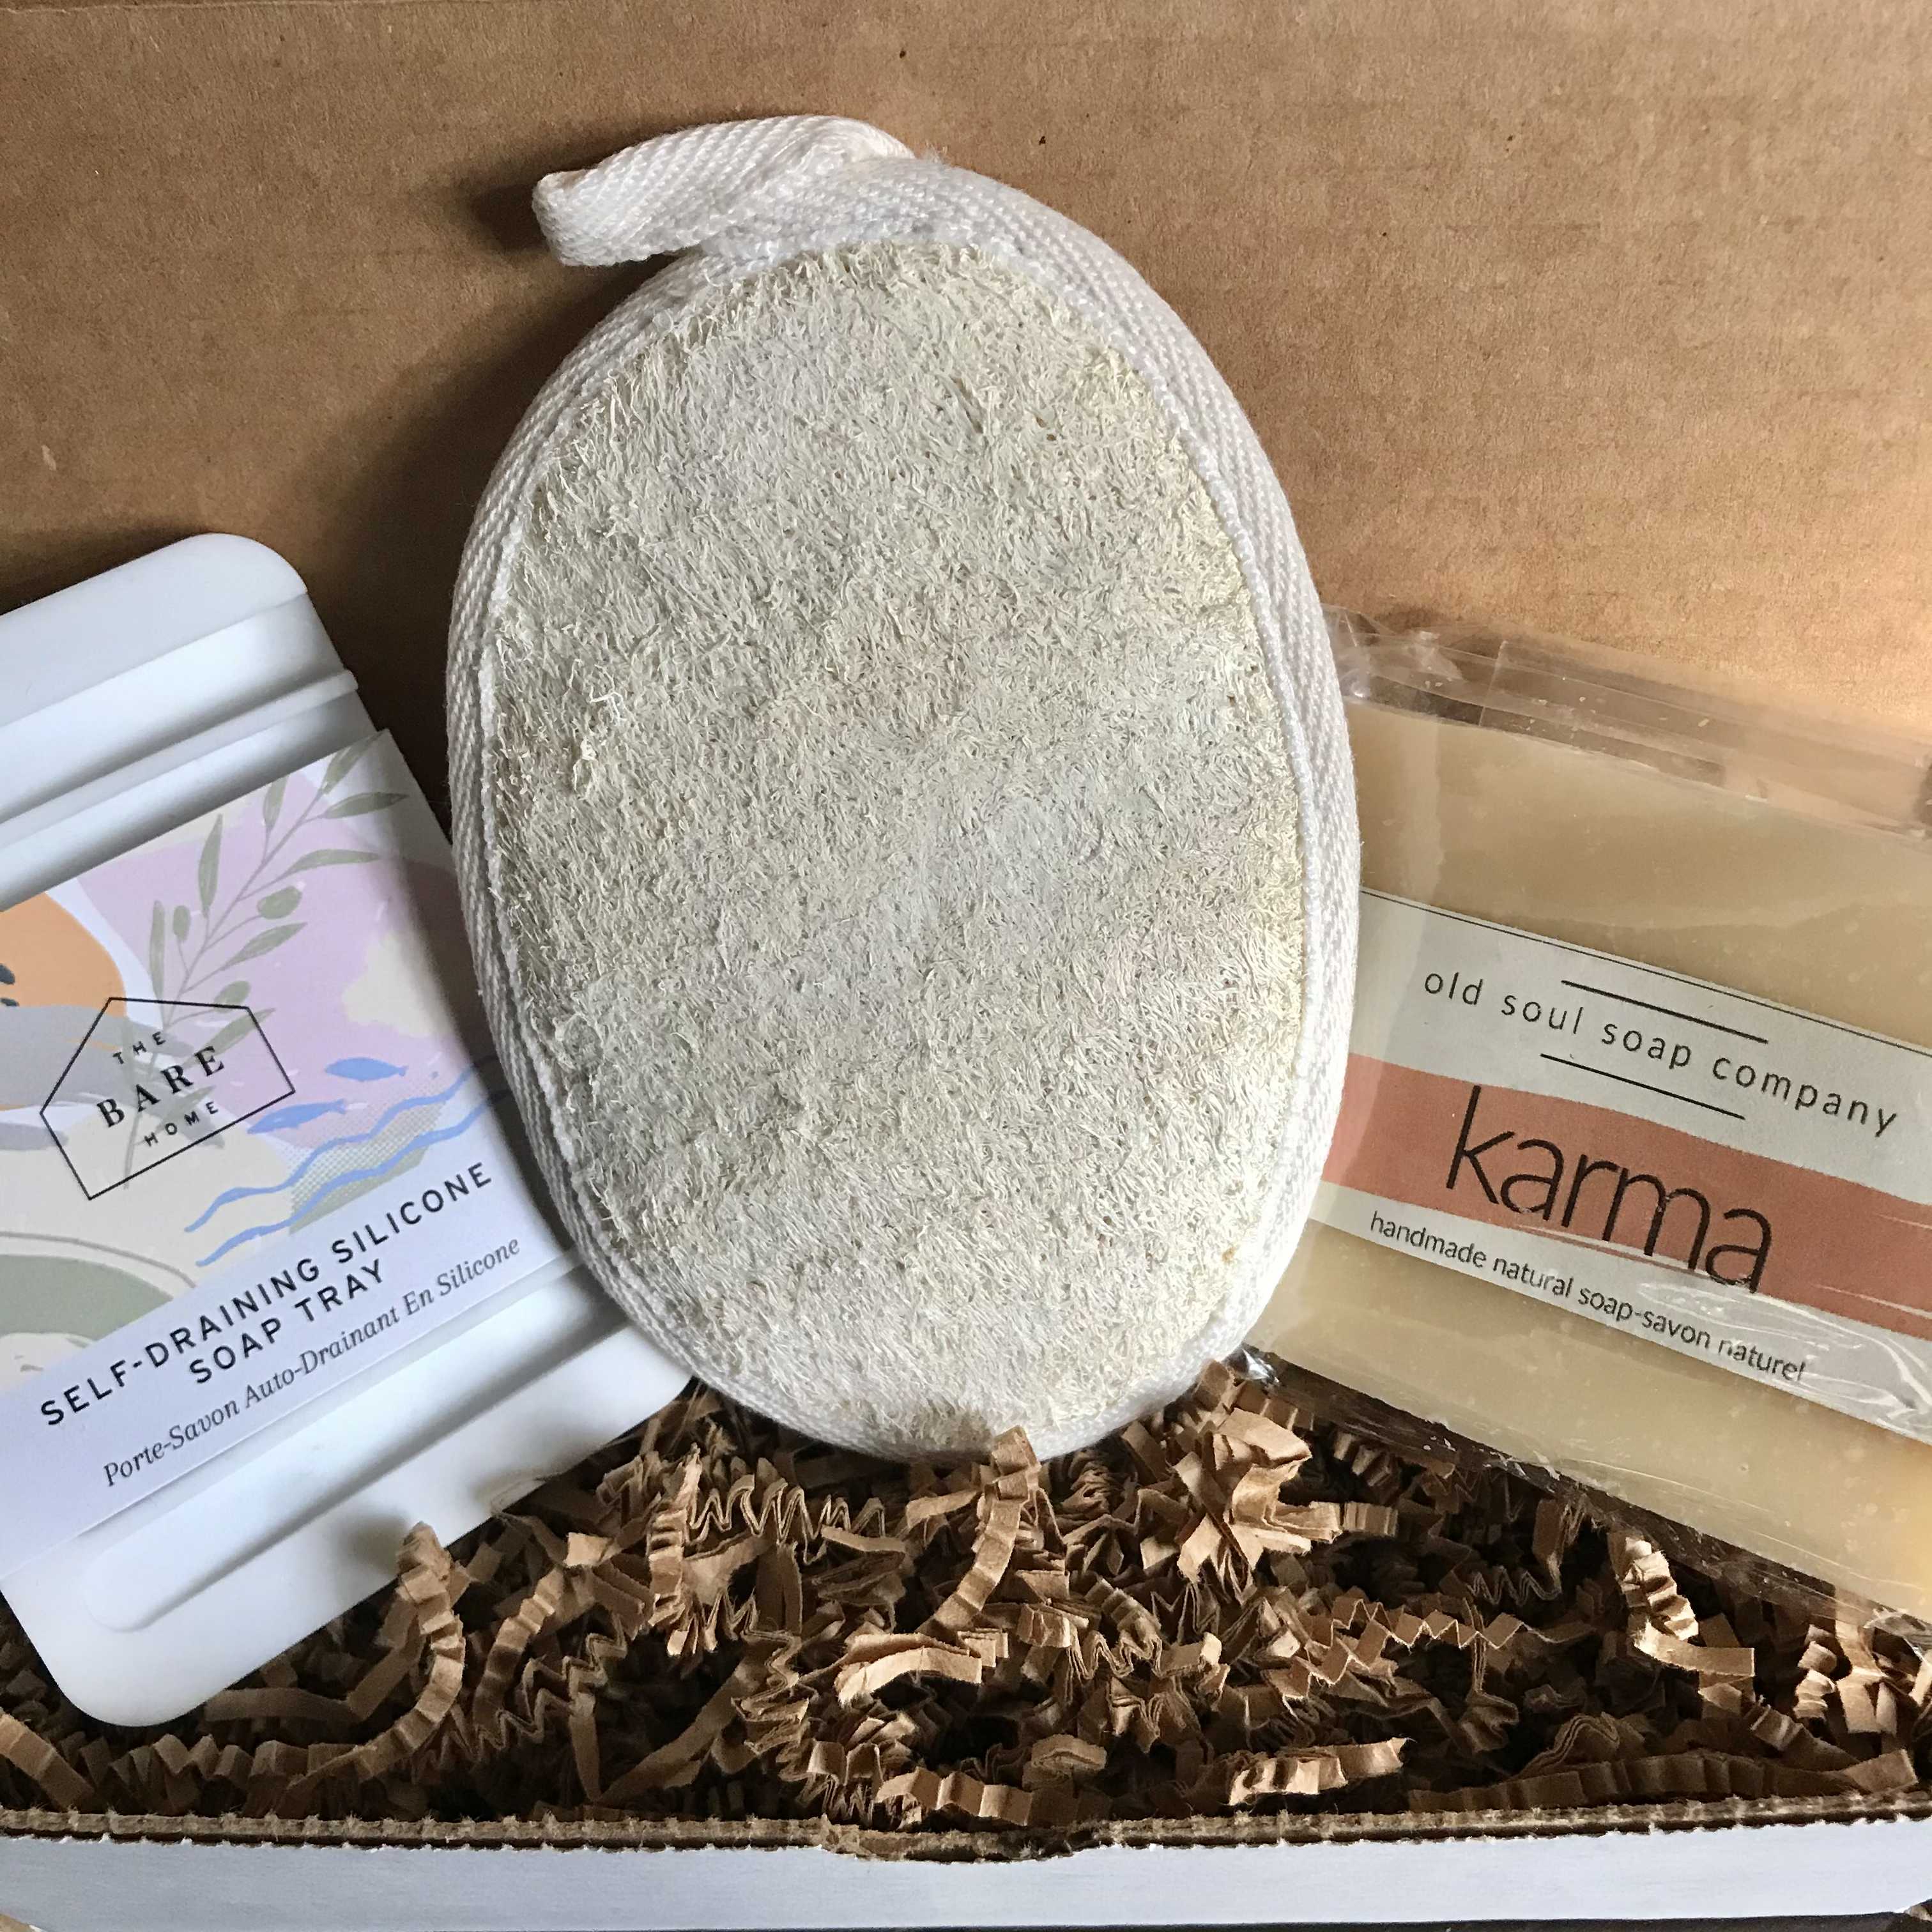 Love the idea giving a sustainable budget-friendly gift that both pampers and energizes the body? If so, this Karma Gift Set may be just the thing.  Everyone needs a little Karma in their life! This Canadian made vegan soap features a empowering blend of Lemongrass, Citrus, Patchouli, Pine and Lavender.